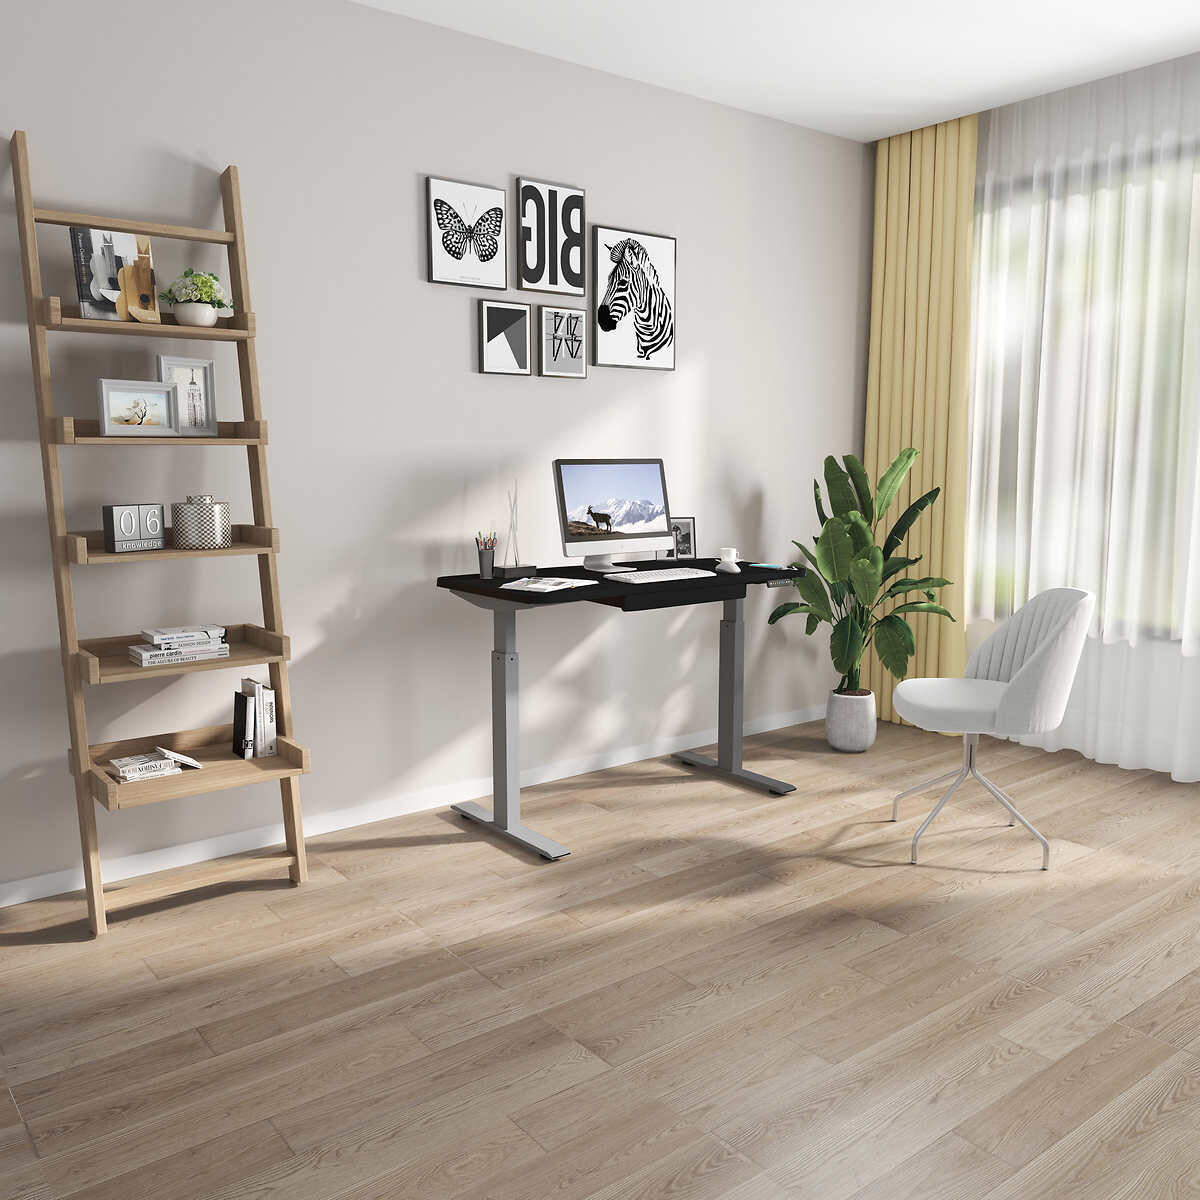 Motionwise 121.9 cm × 61 cm (48 in. × 24 in.) Height Adjustable Standing Desk